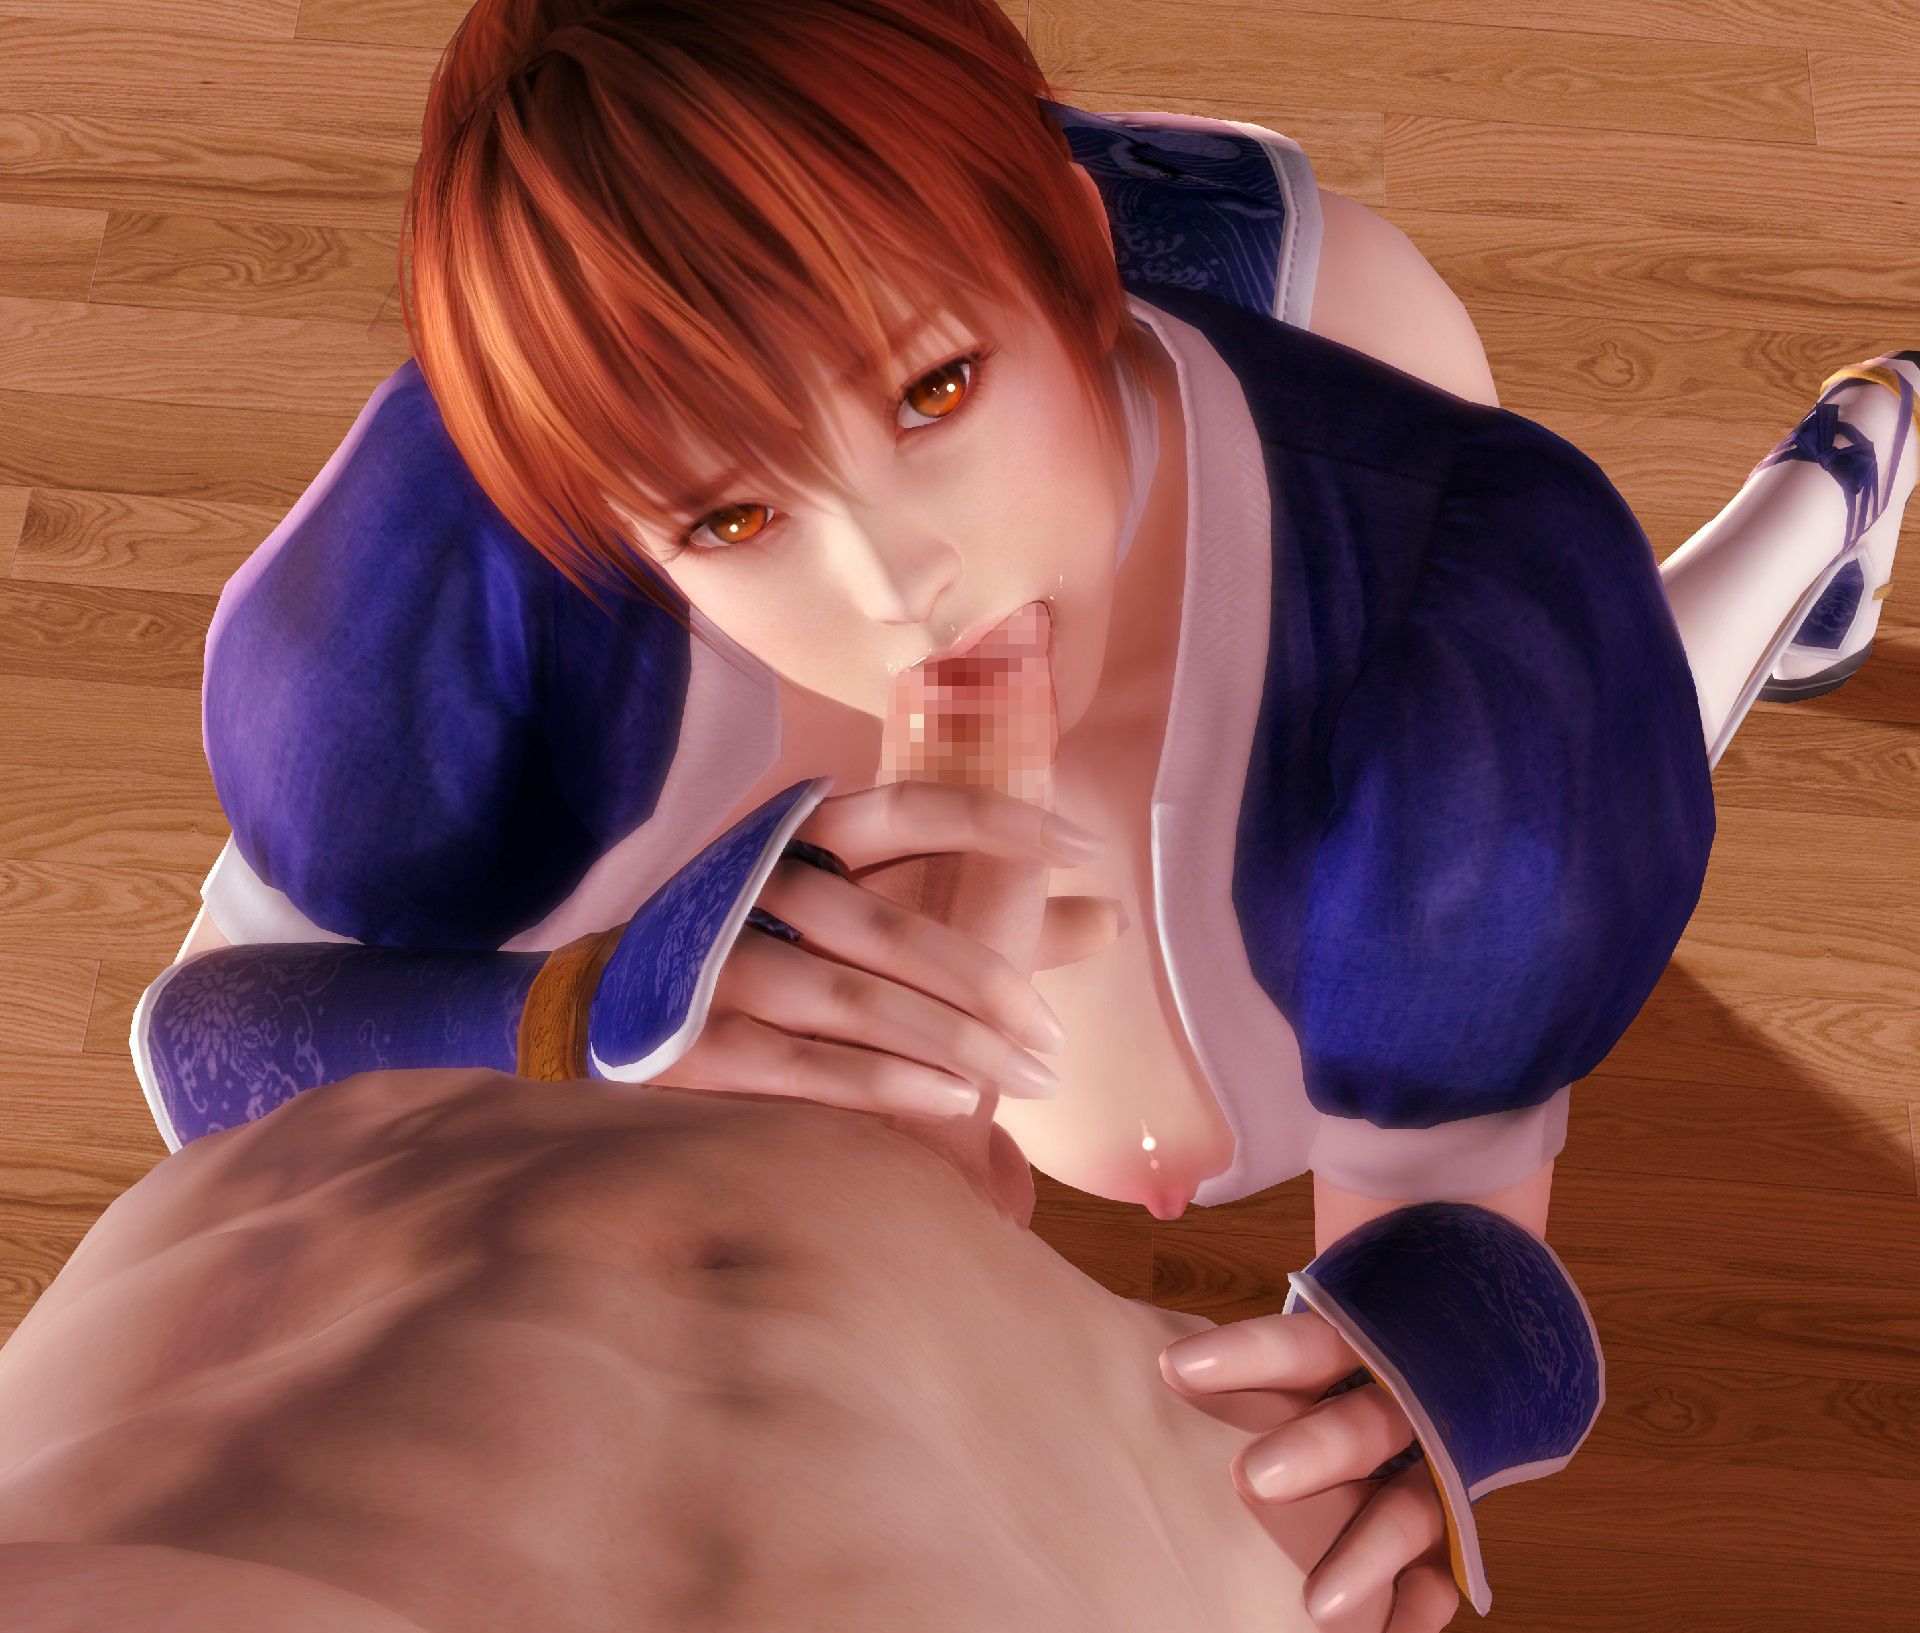 [DEAD OR ALIVE] 3D CG erotic images of DOA heroines Part 5 11